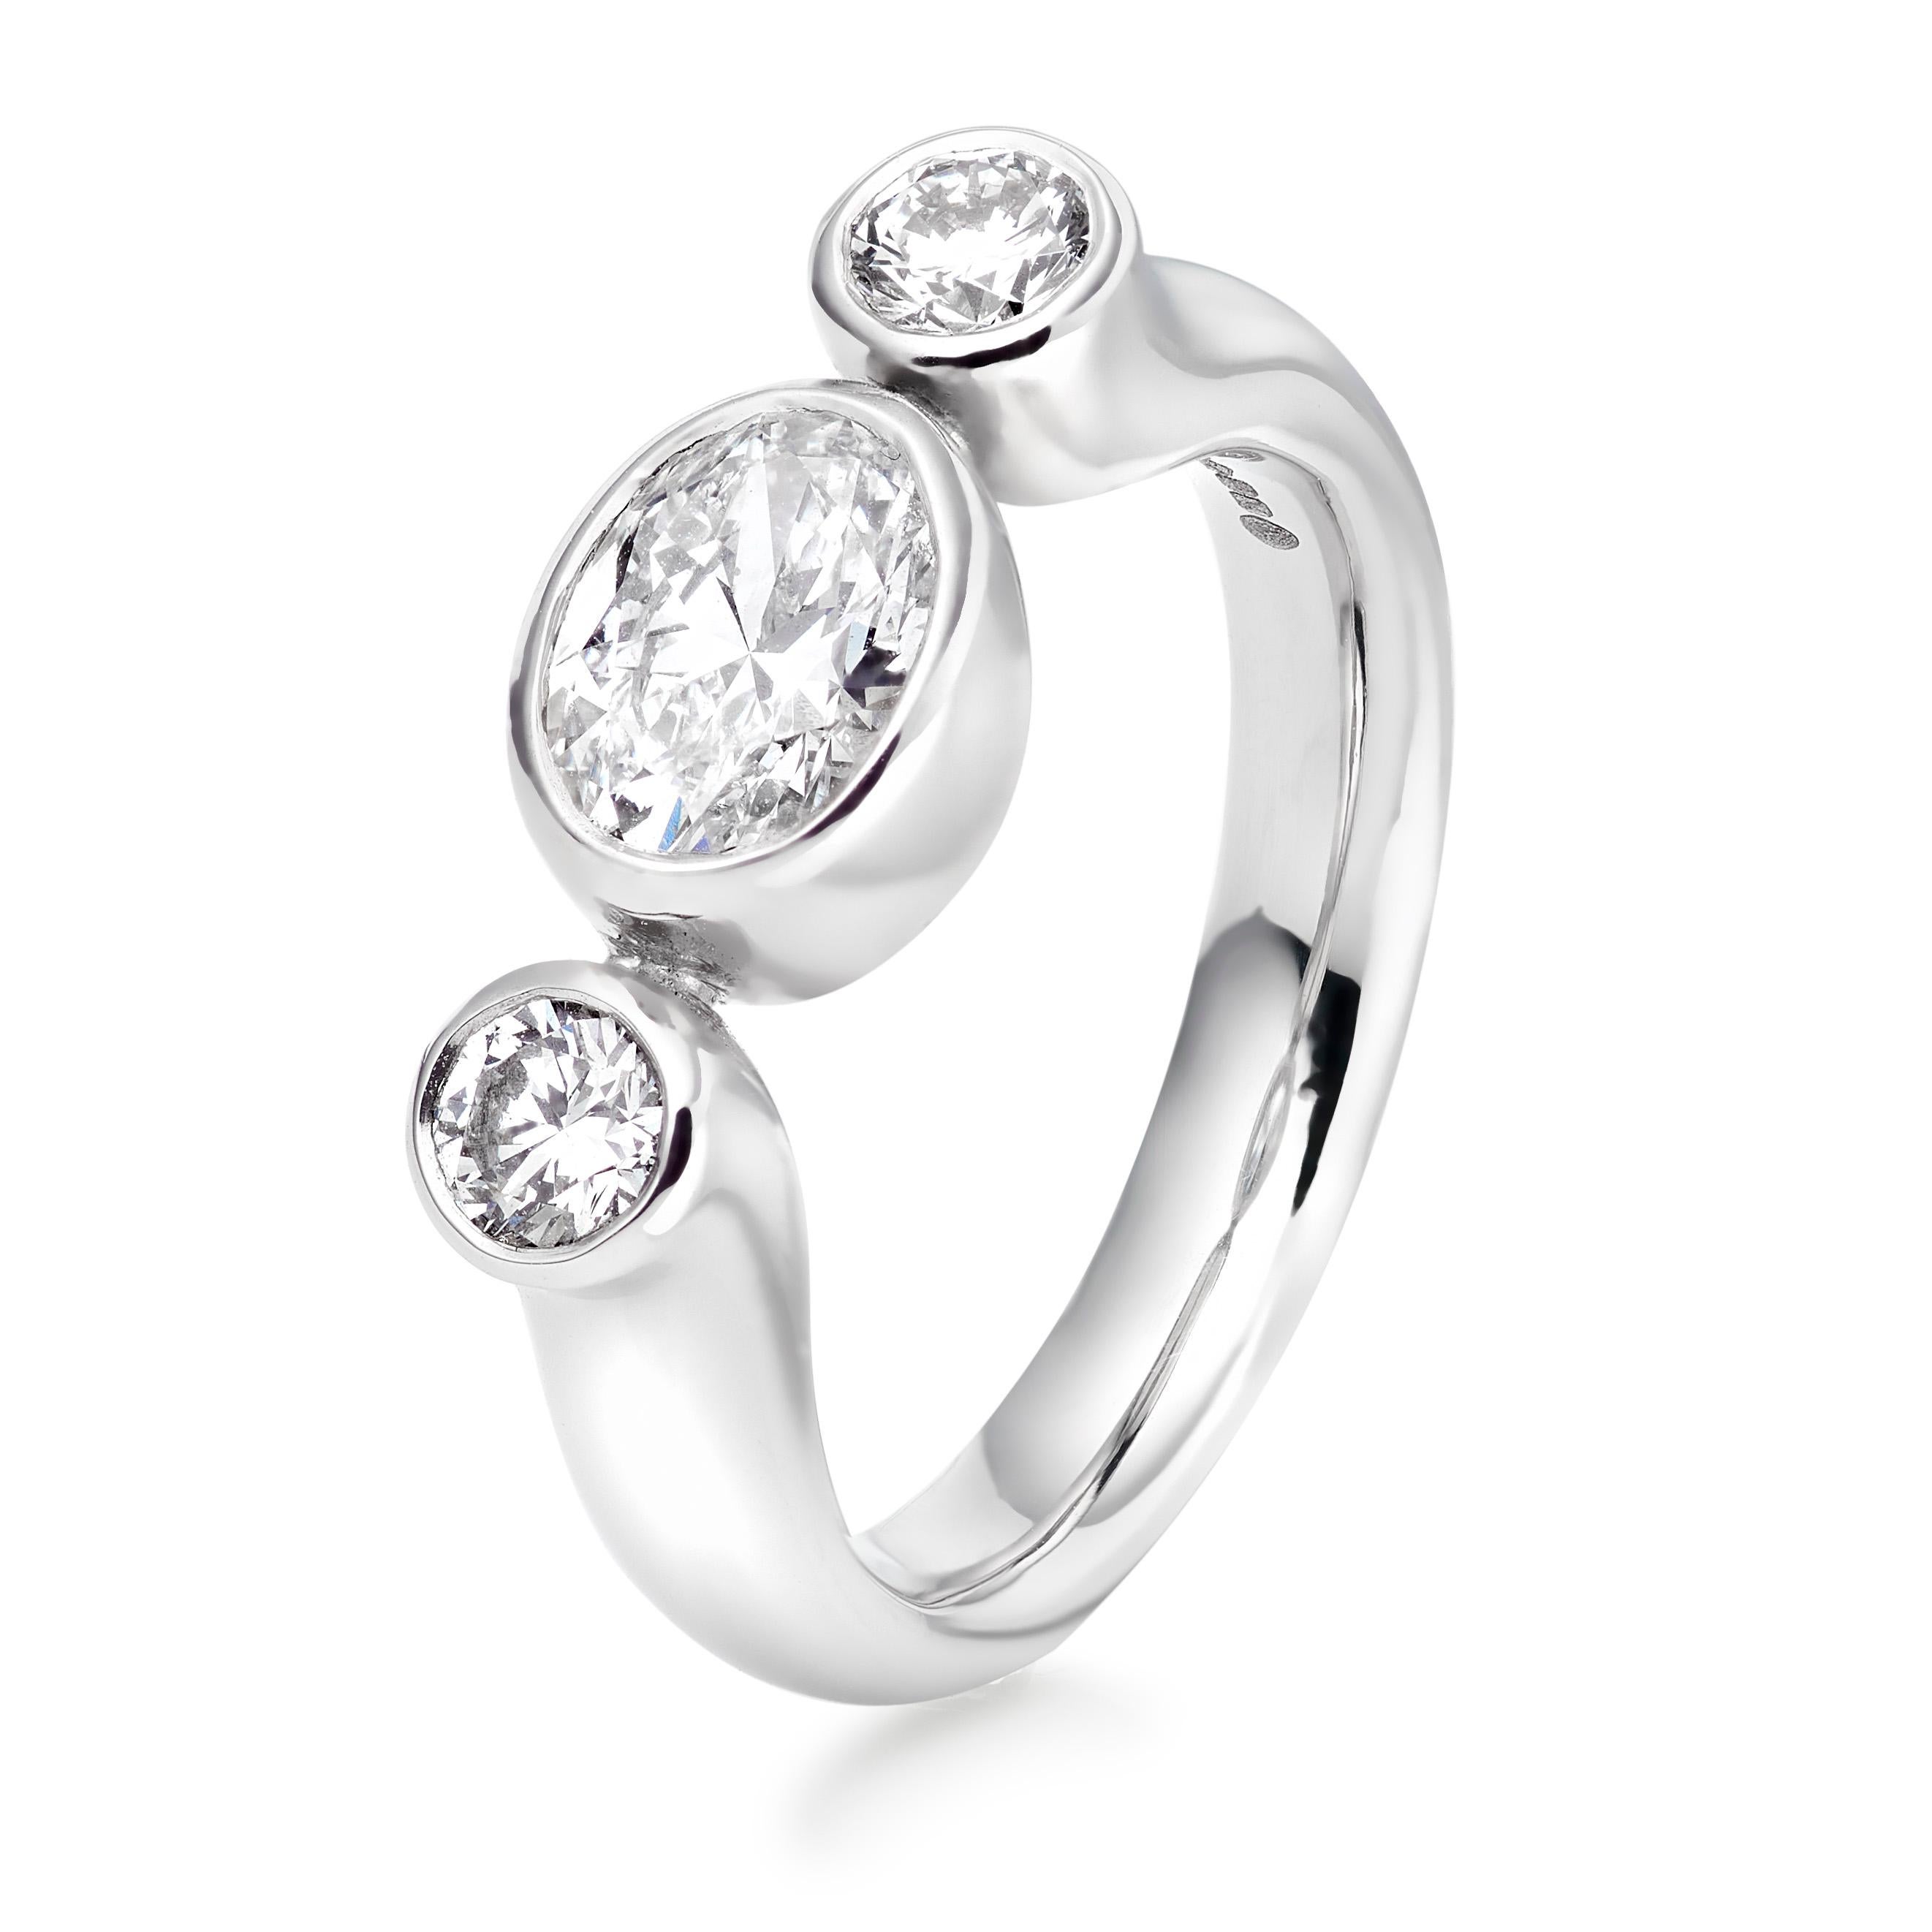 The Bon Bon is one of Lilly Hastedt's signature rings. The design of this ring follows the roundness of the gemstones. It is a modern version of a three stone ring with a central oval diamond paired with sparkling round diamonds on either side.